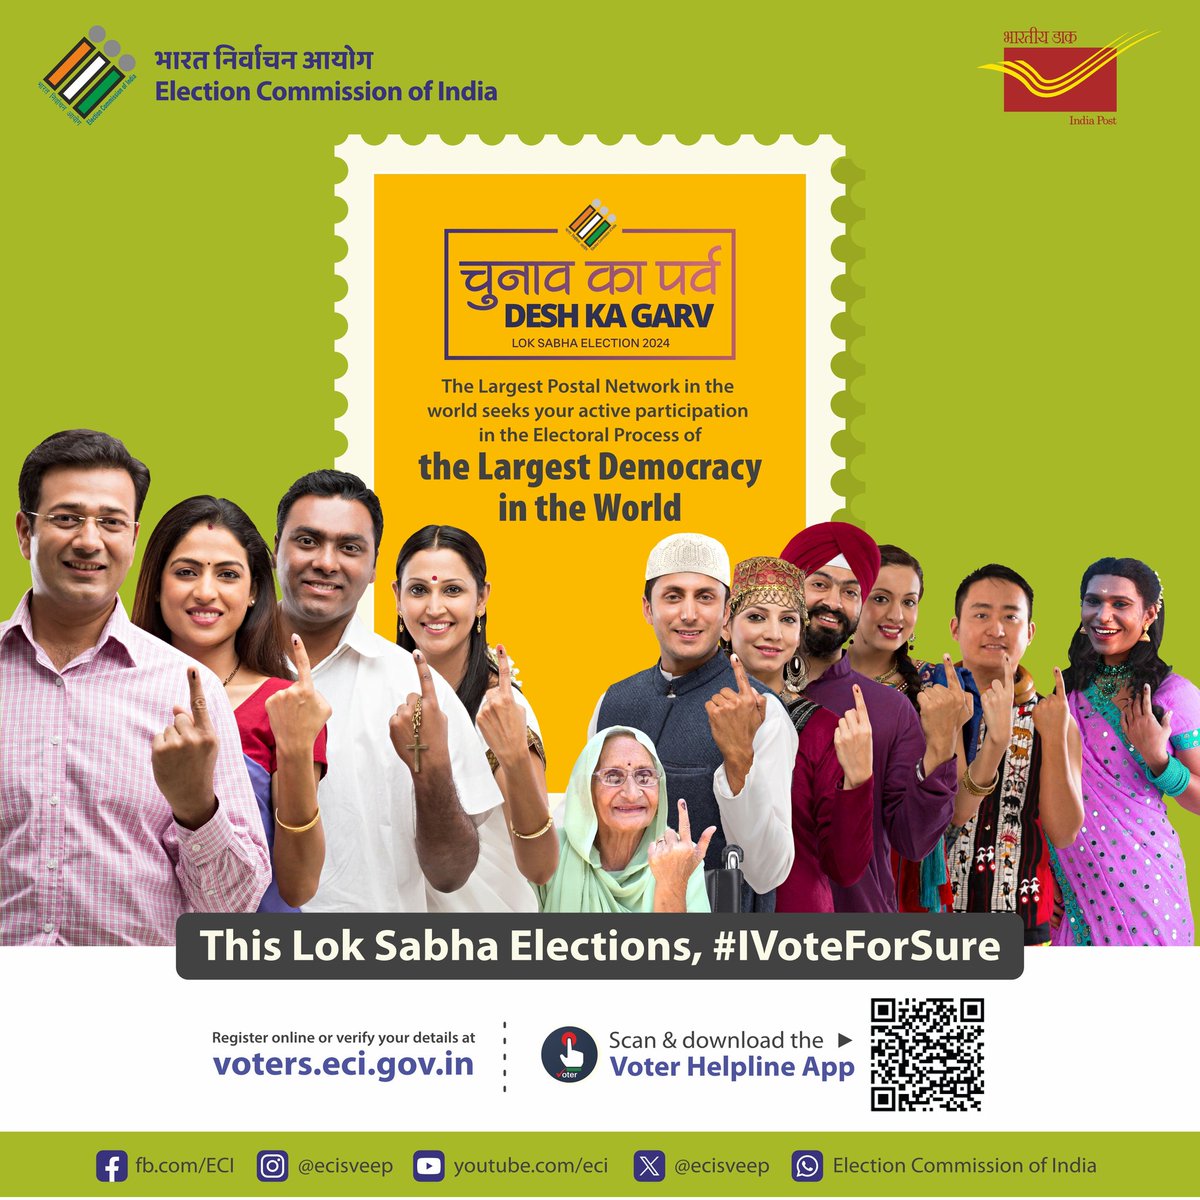 Around 970 million people from different cities,villages and towns come together to participate in the democratic process, setting an example of unity in diversity.Don't forget to cast your vote and celebrate the festival of elections with pride.
#IVoteForSure
#MeraVoteDeshkeLiye